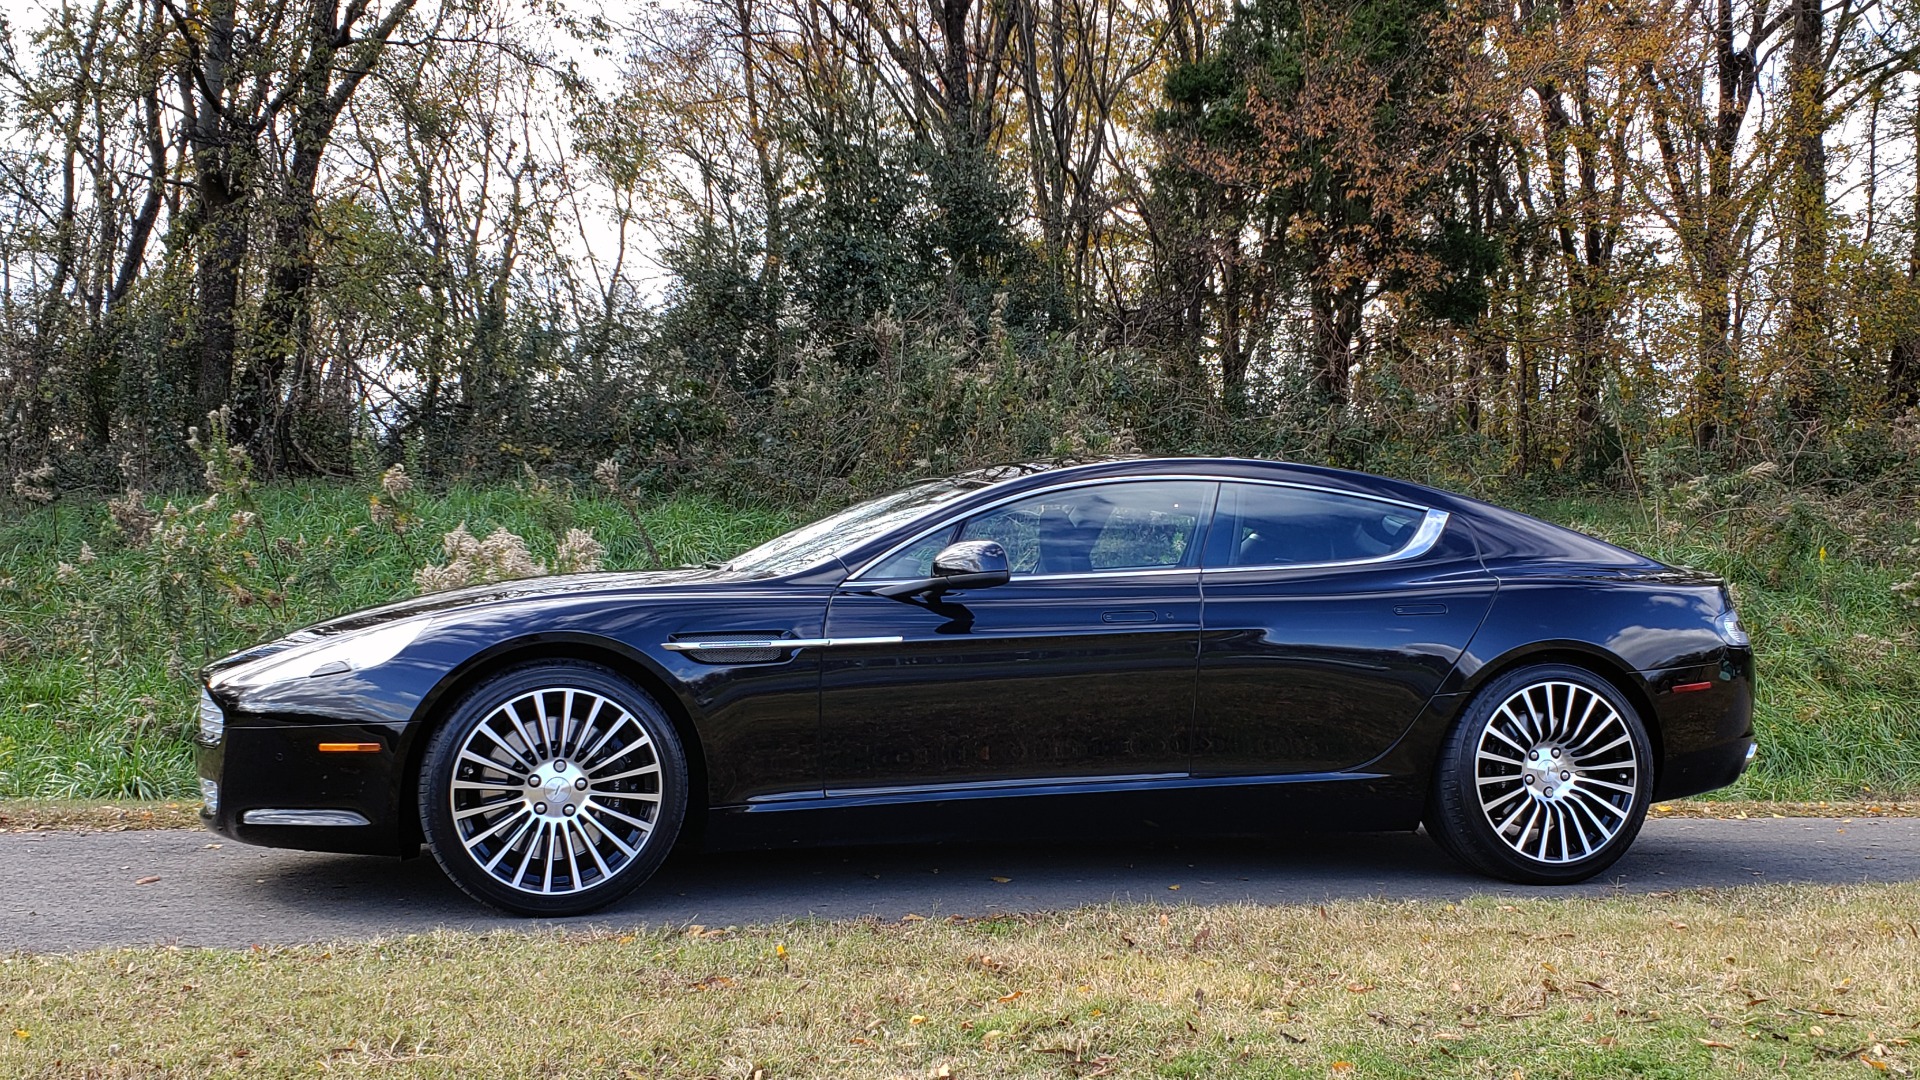 Used 2012 Aston Martin RAPIDE LUXURY 6.0L V12 / NAV / B&O SND / ENTERTAINMENT / REARVIEW for sale Sold at Formula Imports in Charlotte NC 28227 2